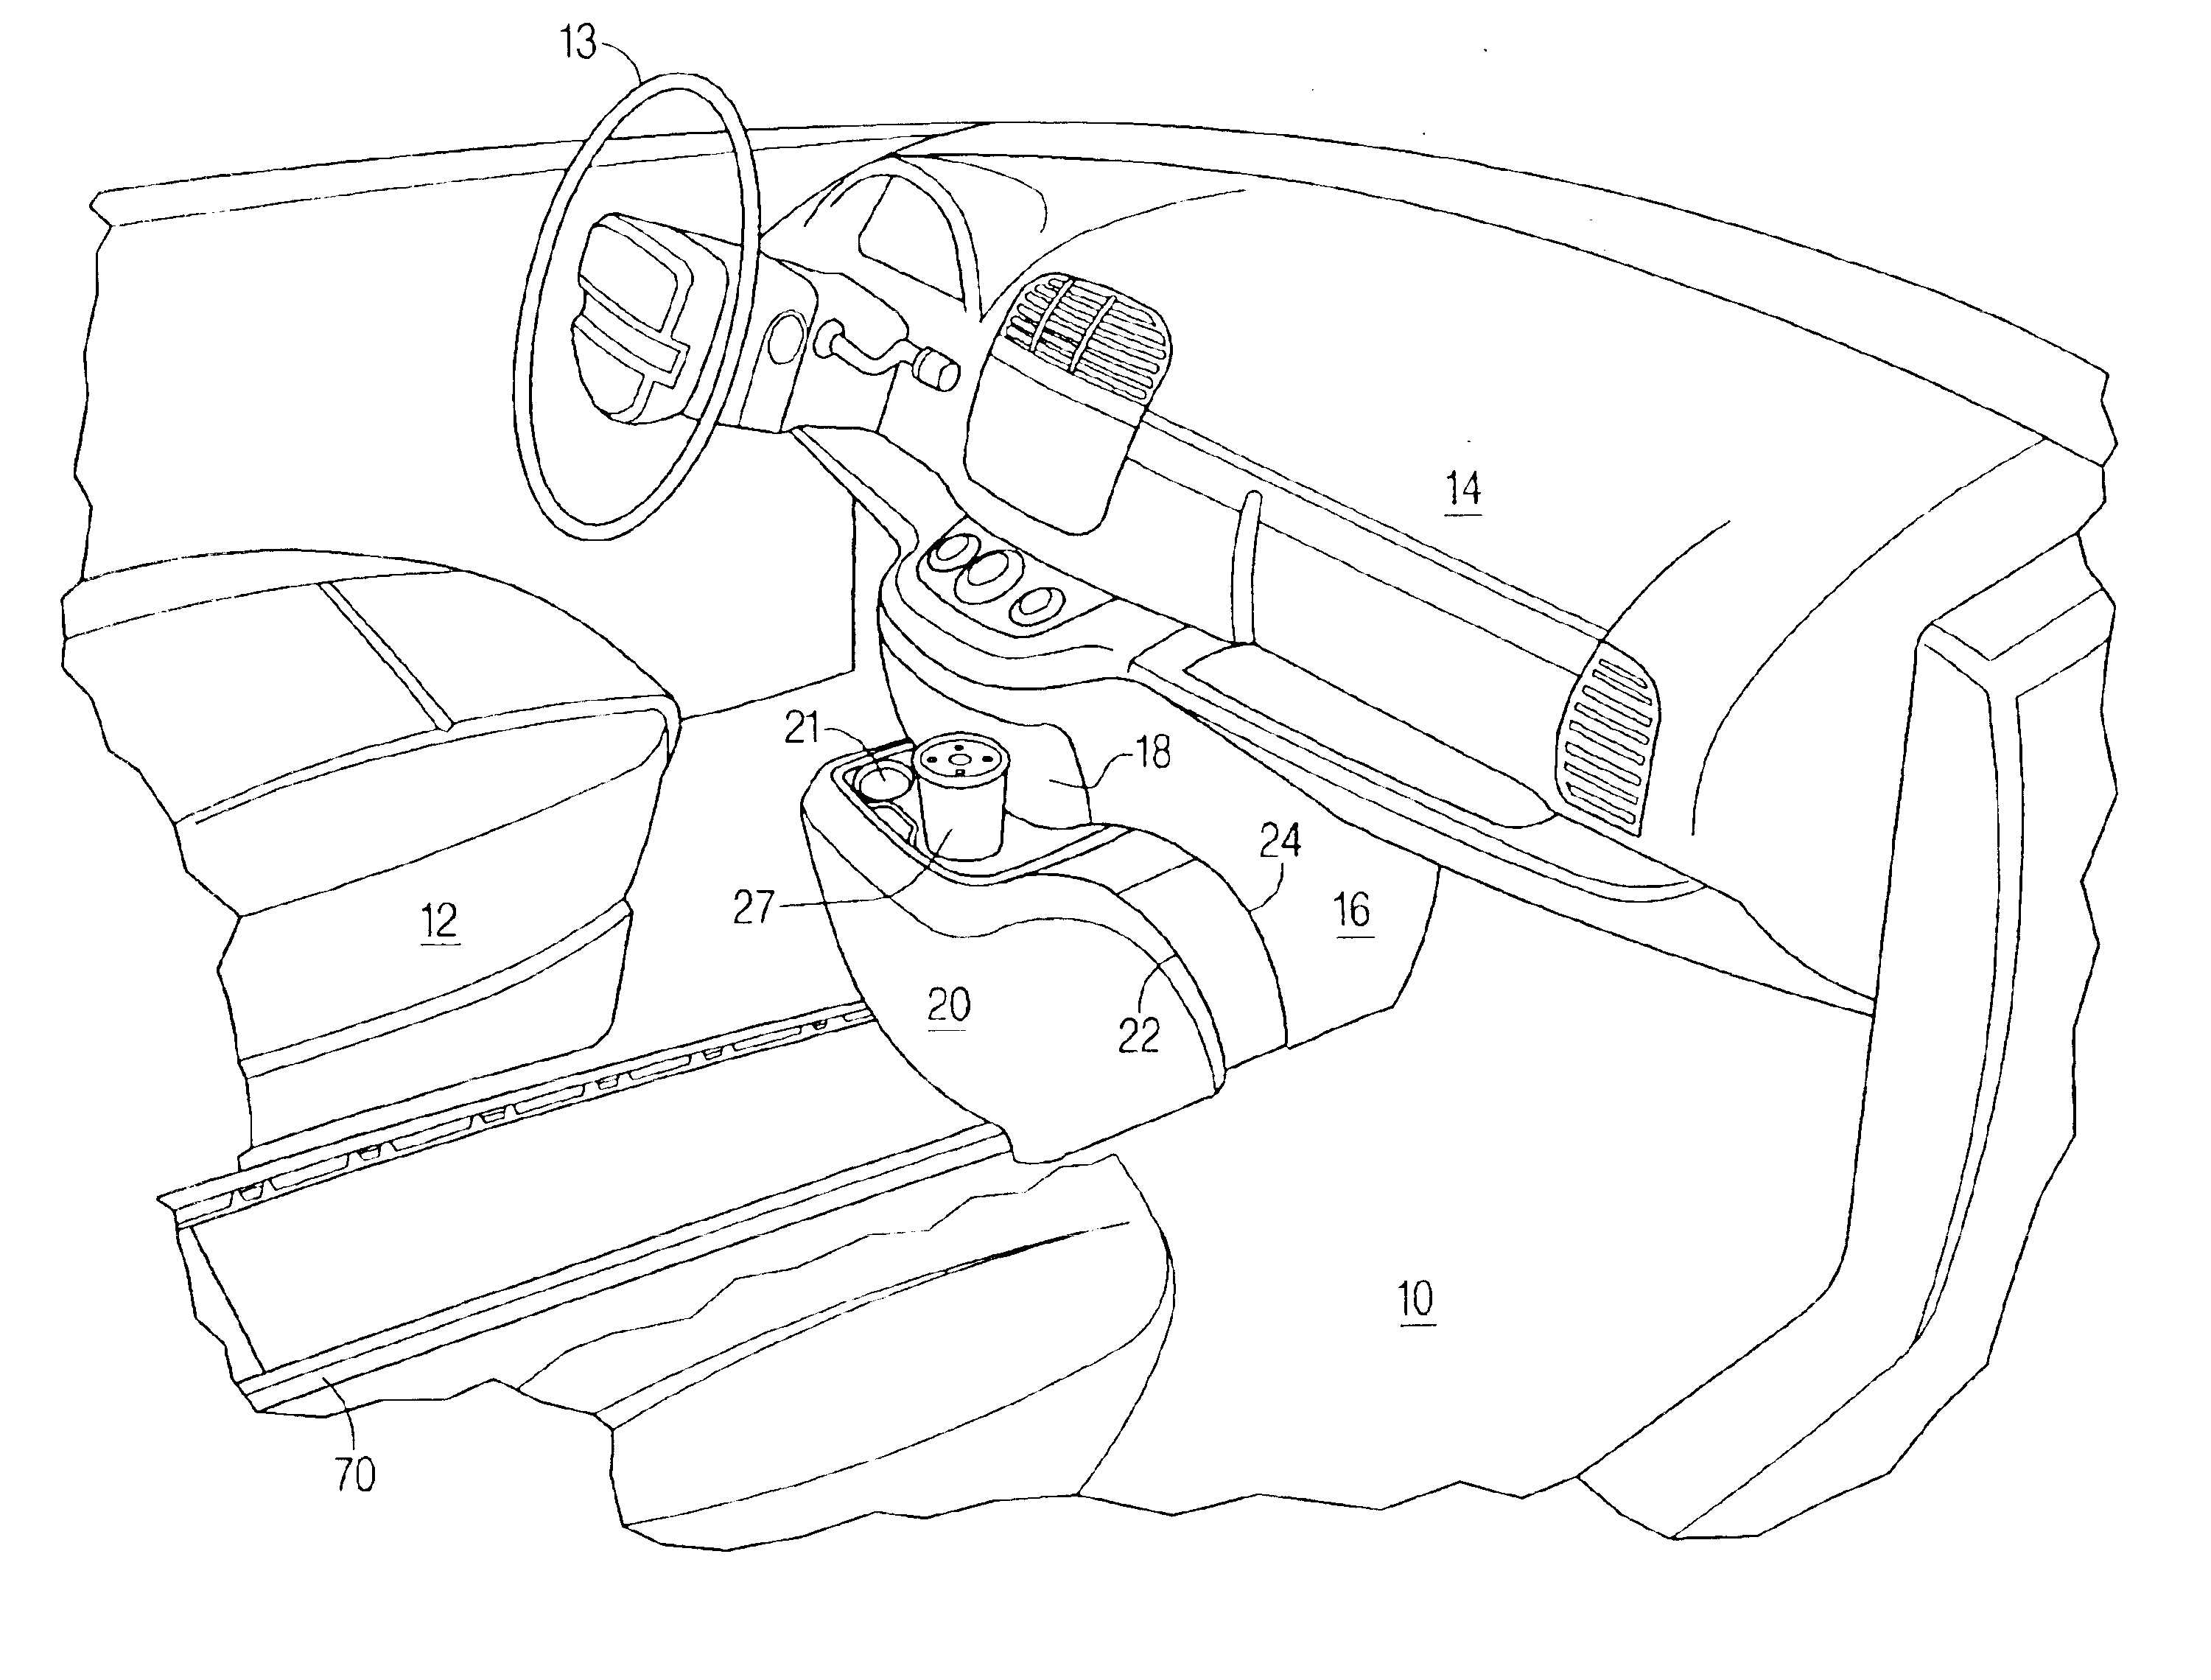 Sliding and nesting console system